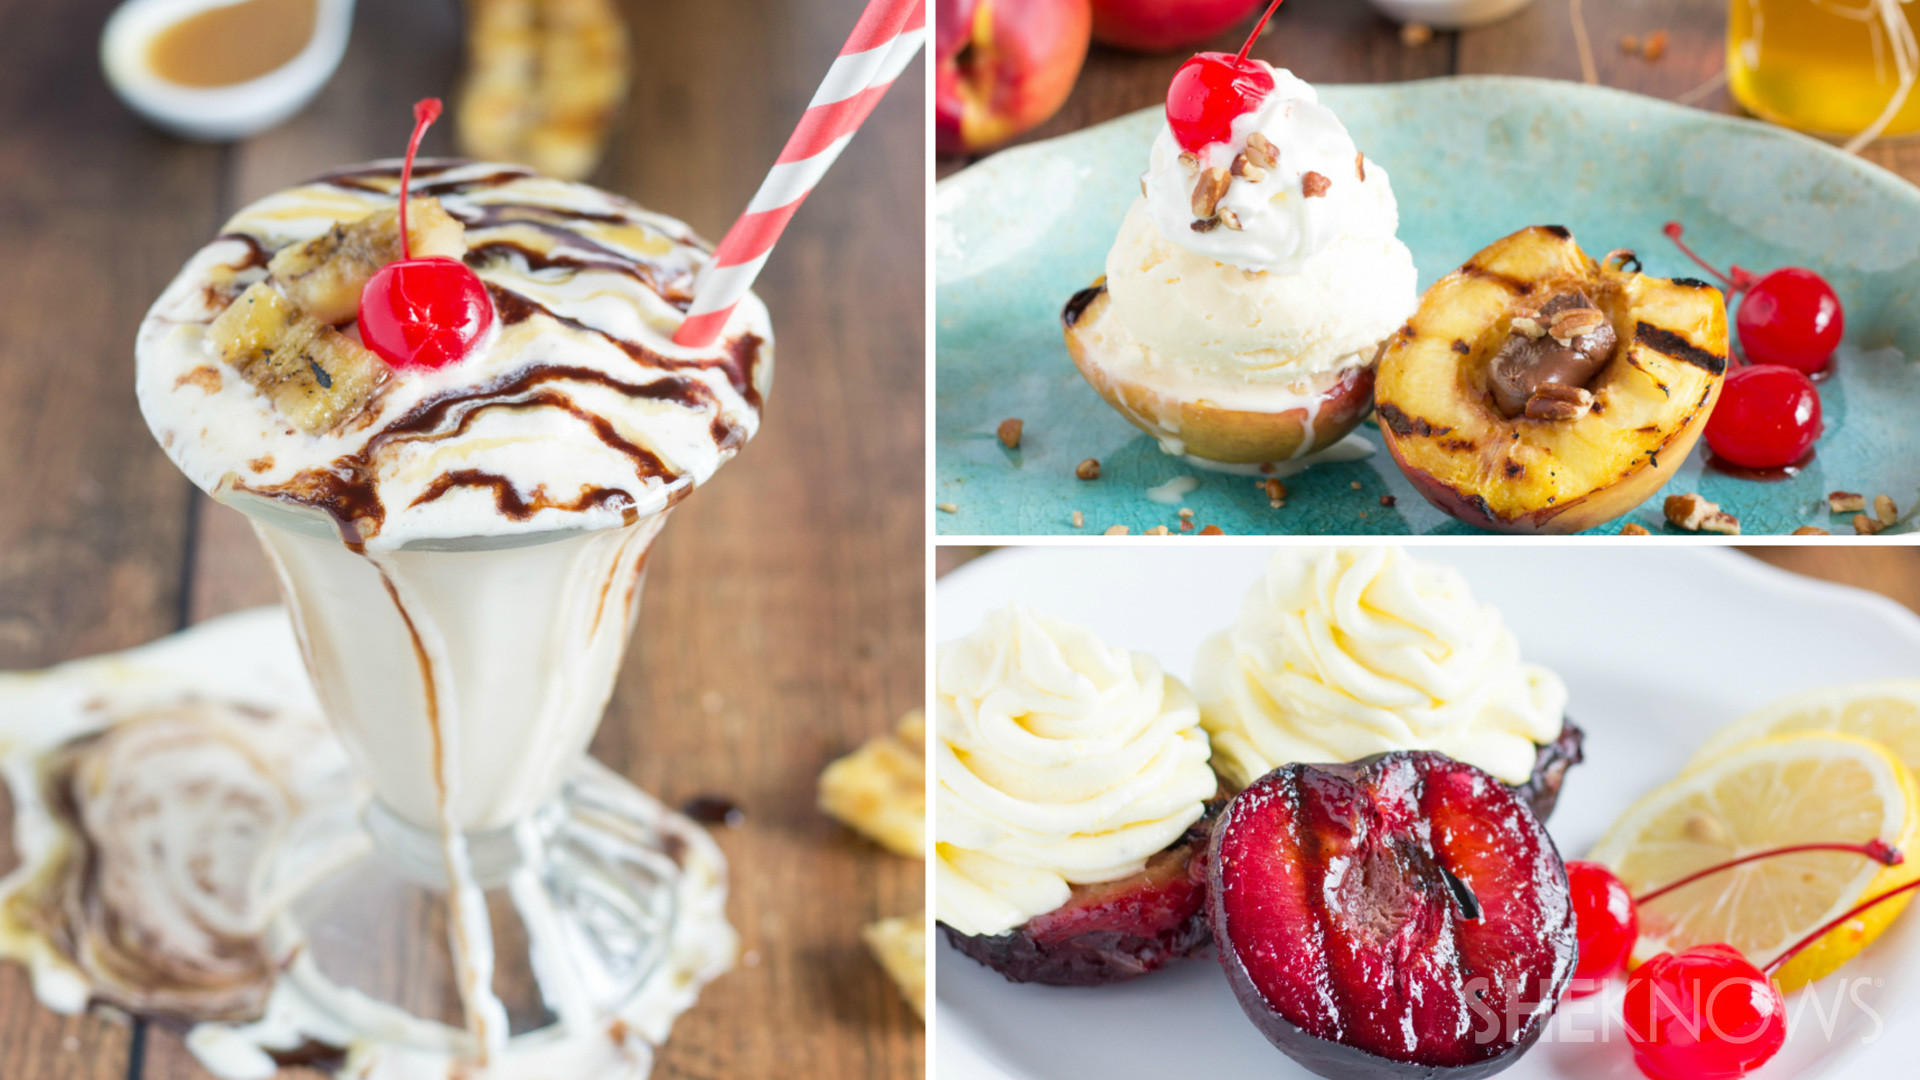 Grilled Fruit Desserts
 3 Summer desserts you can make on the grill